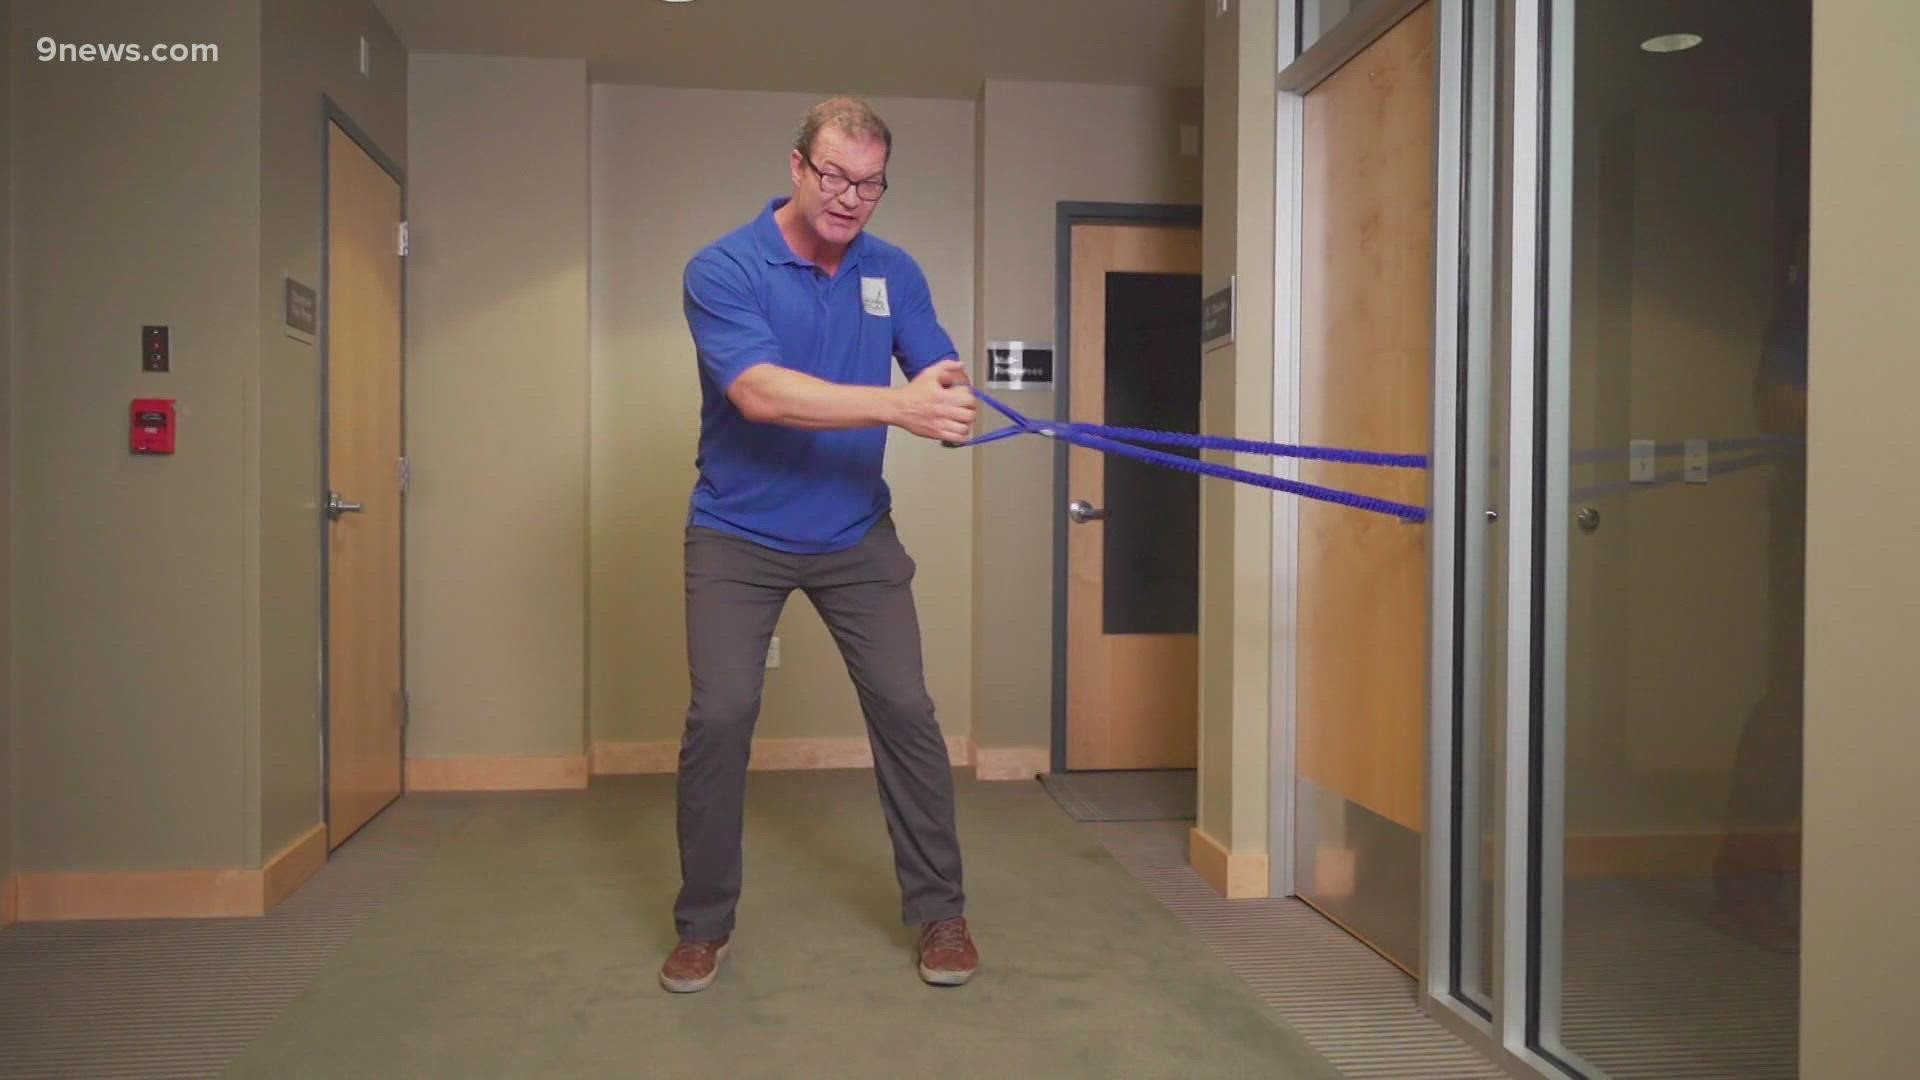 9NEWS fitness expert Jamie Atlas shares several exercises using resistance bands that you can do at home.